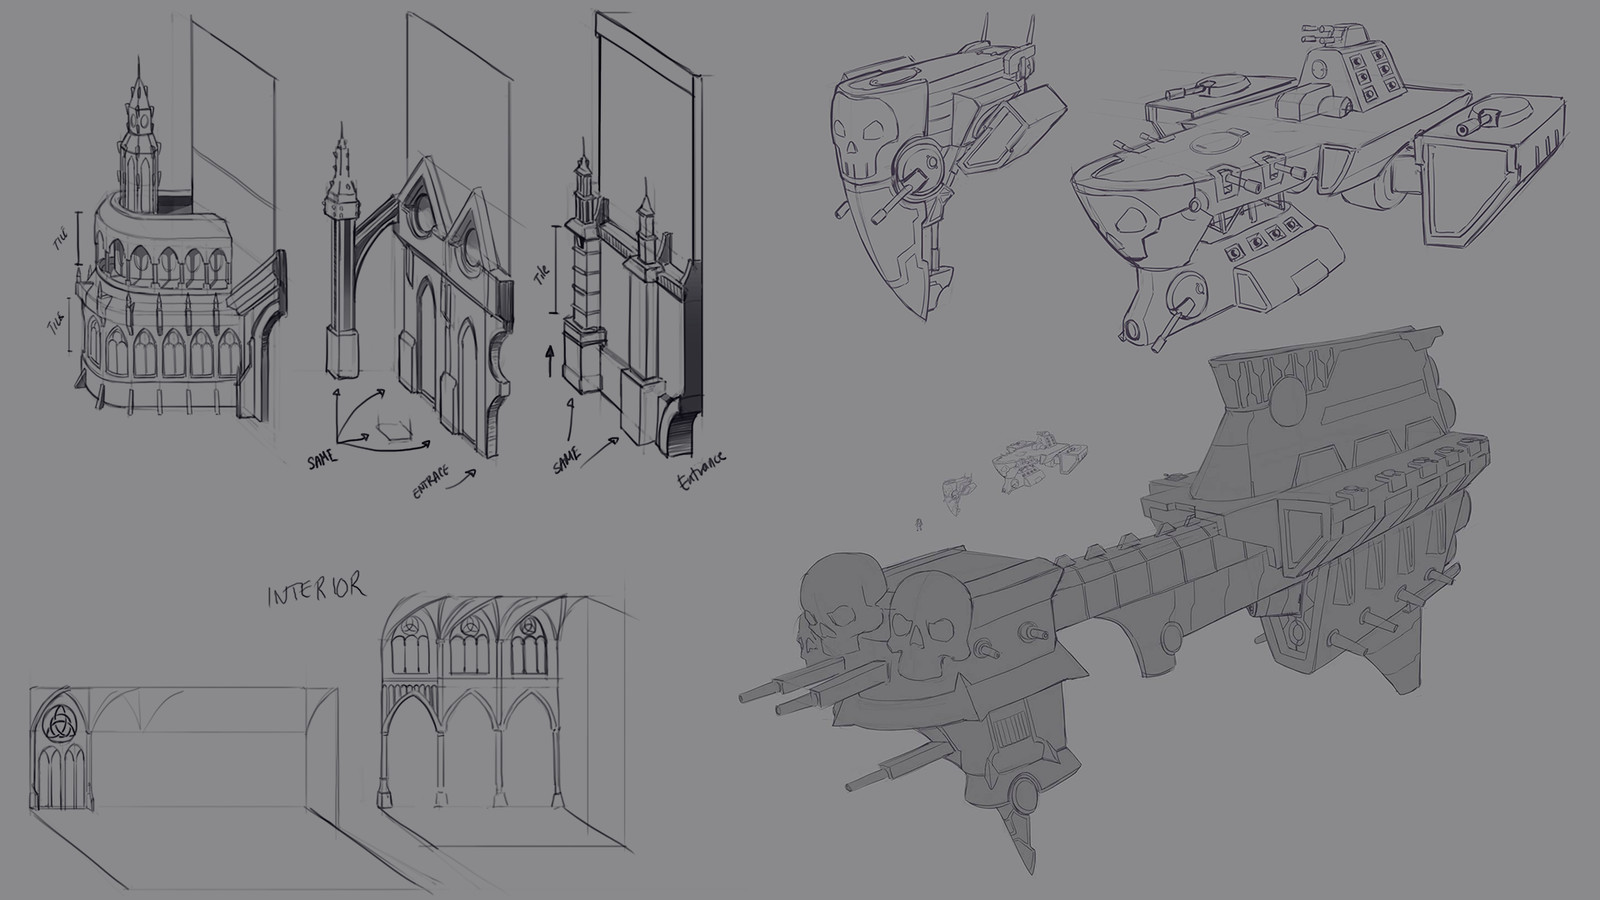 Level Pieces and Ships design for Tyr: Chains of Valhalla